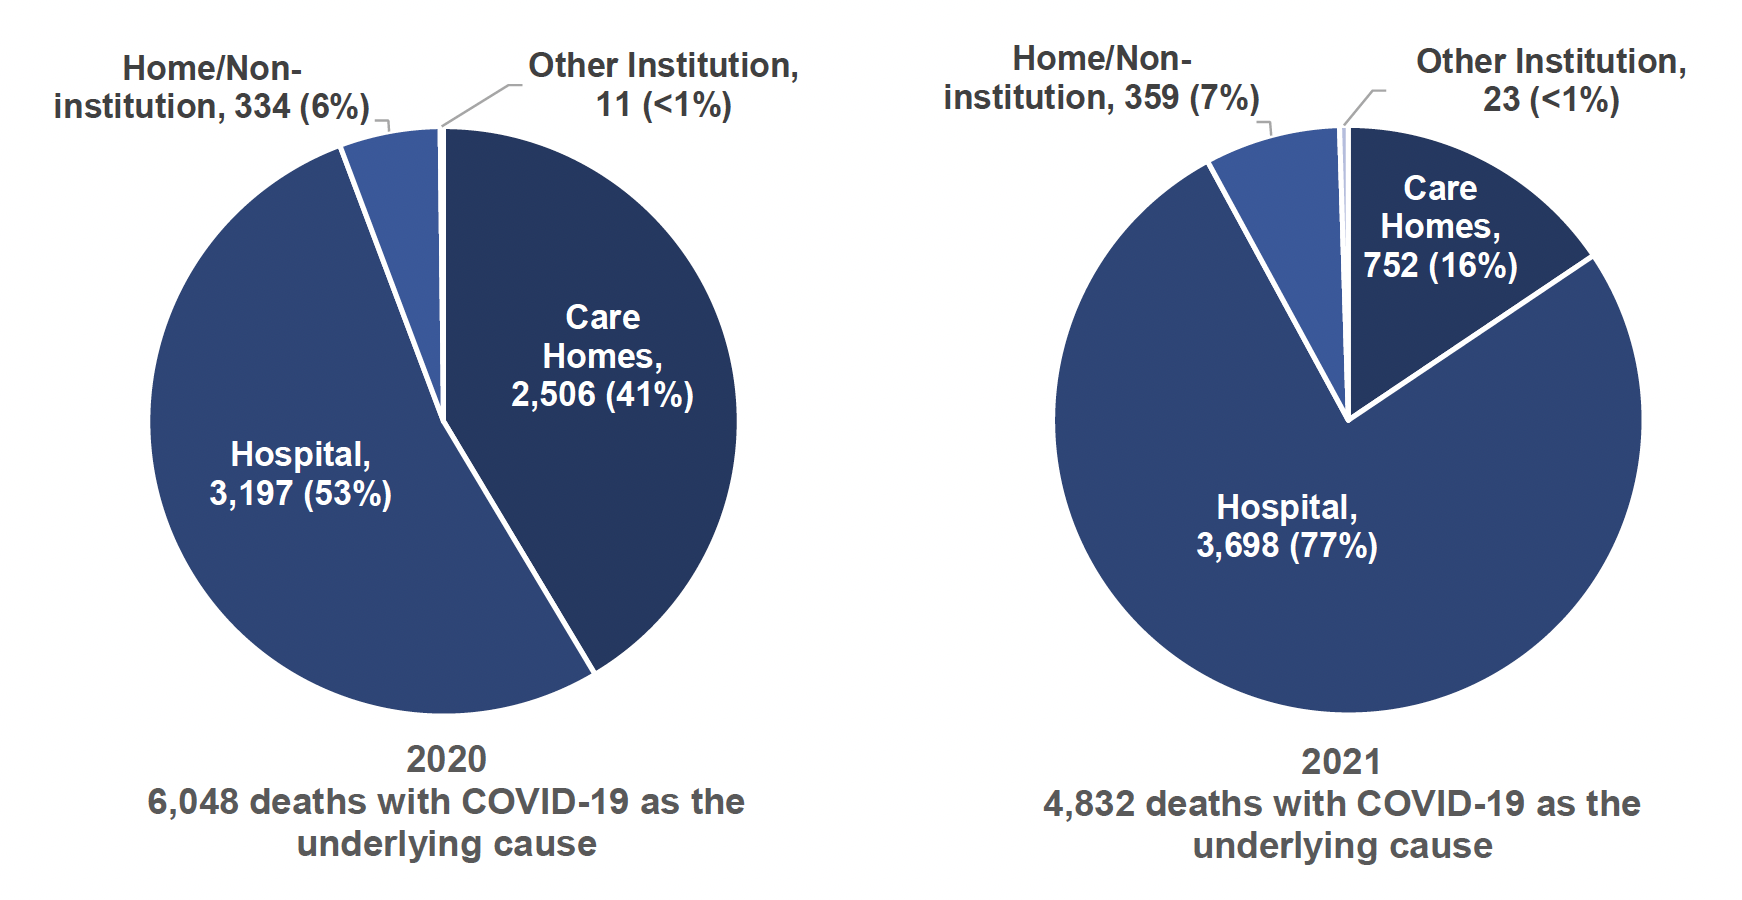 Figure 9: Two pie charts displaying the proportion of deaths with COVID-19 as the underlying cause by setting in Scotland, 2020 (left) and 2021 (right).